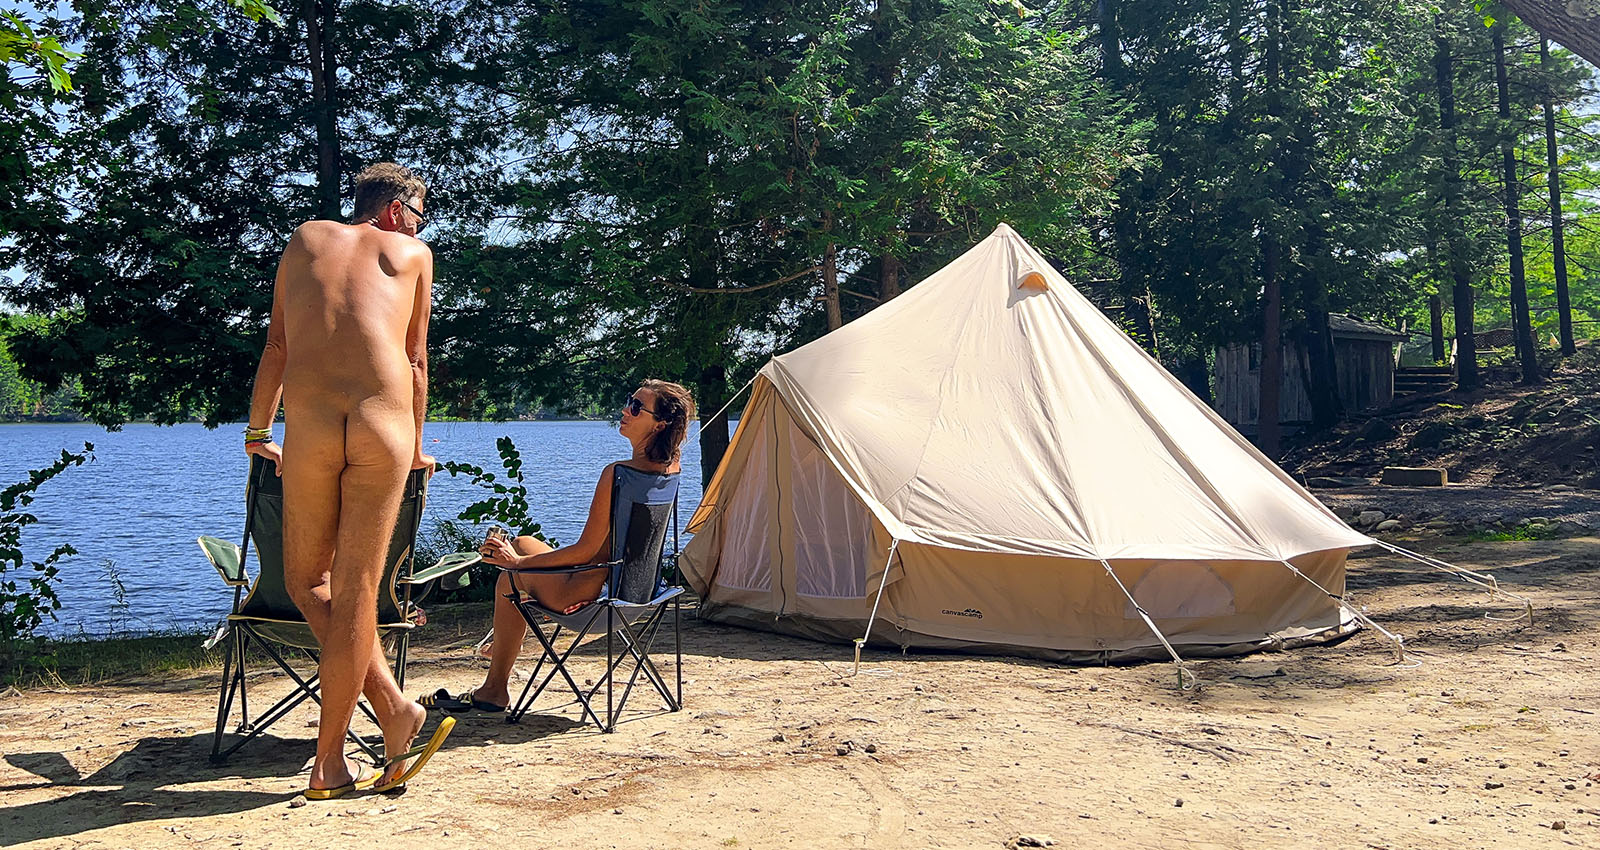 Naked in a Tent in Canada